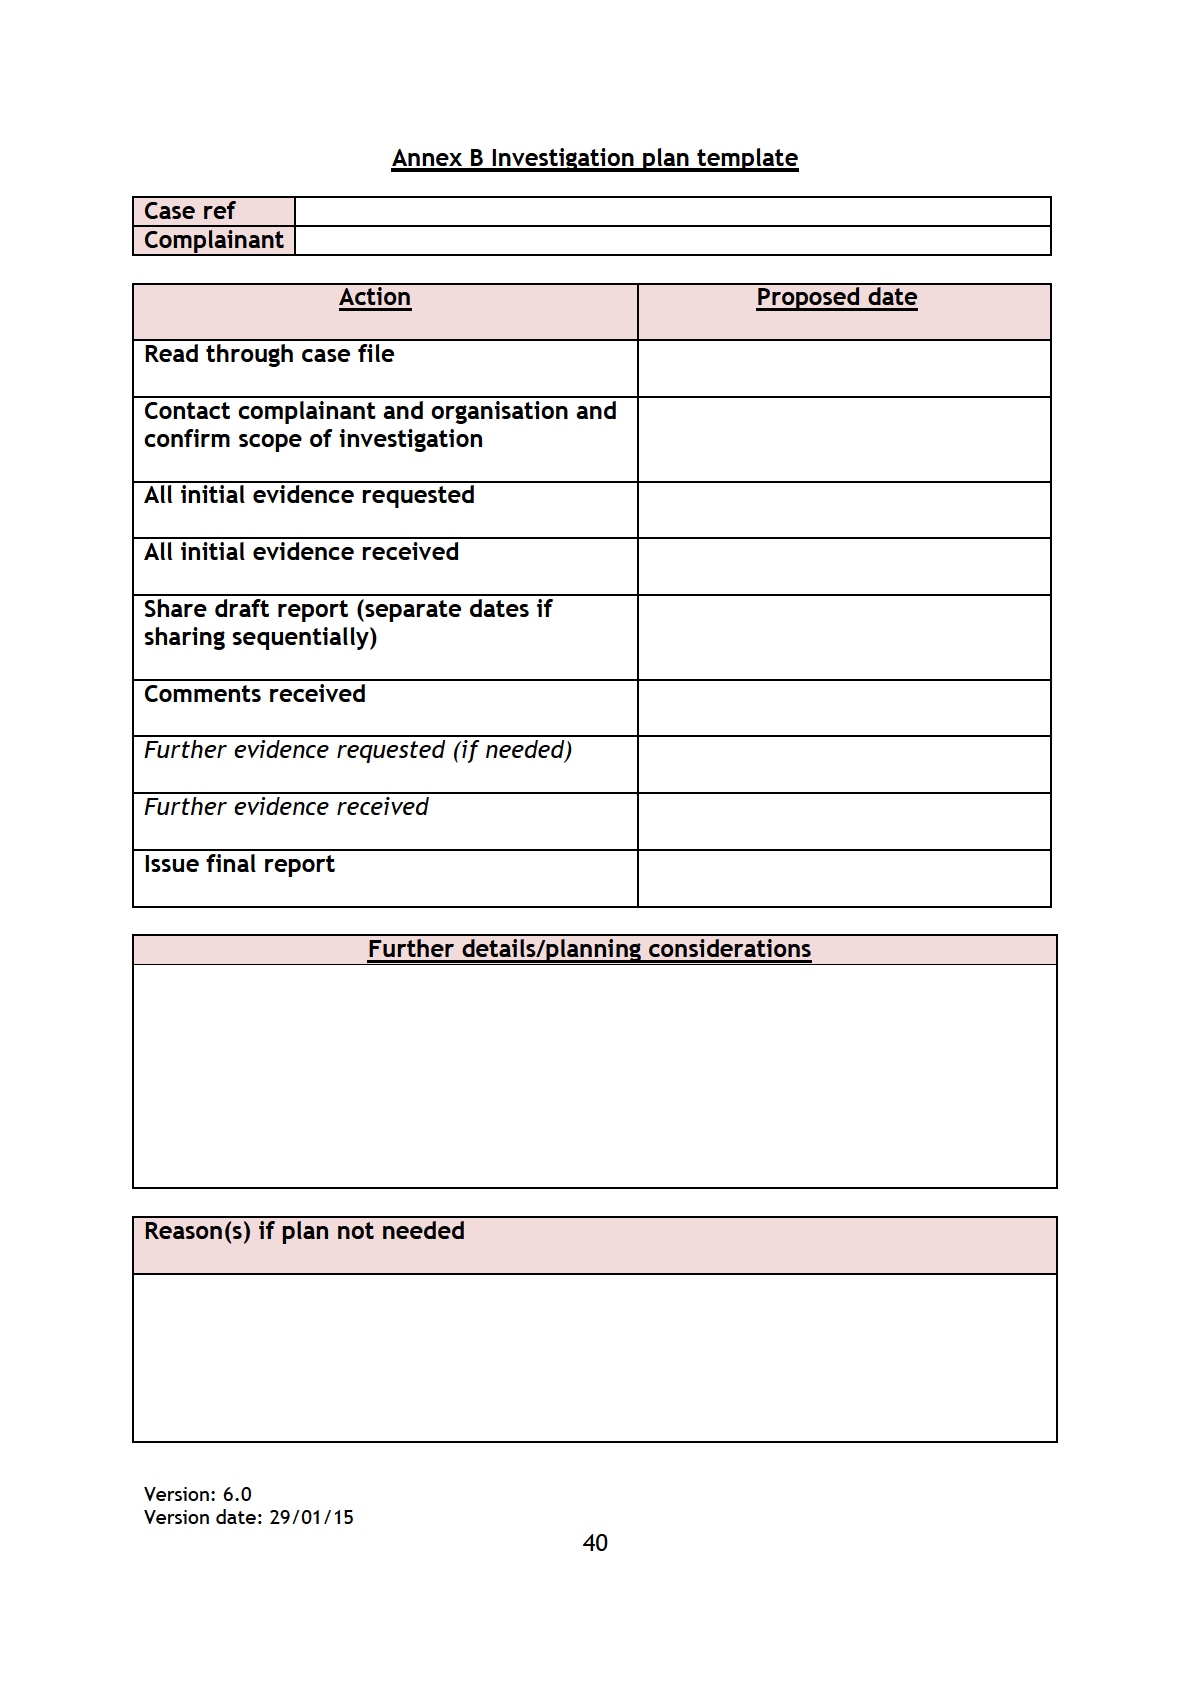 Investigation Manual 6.0 Final 20150129.pdf Pertaining To Failure Investigation Report Template